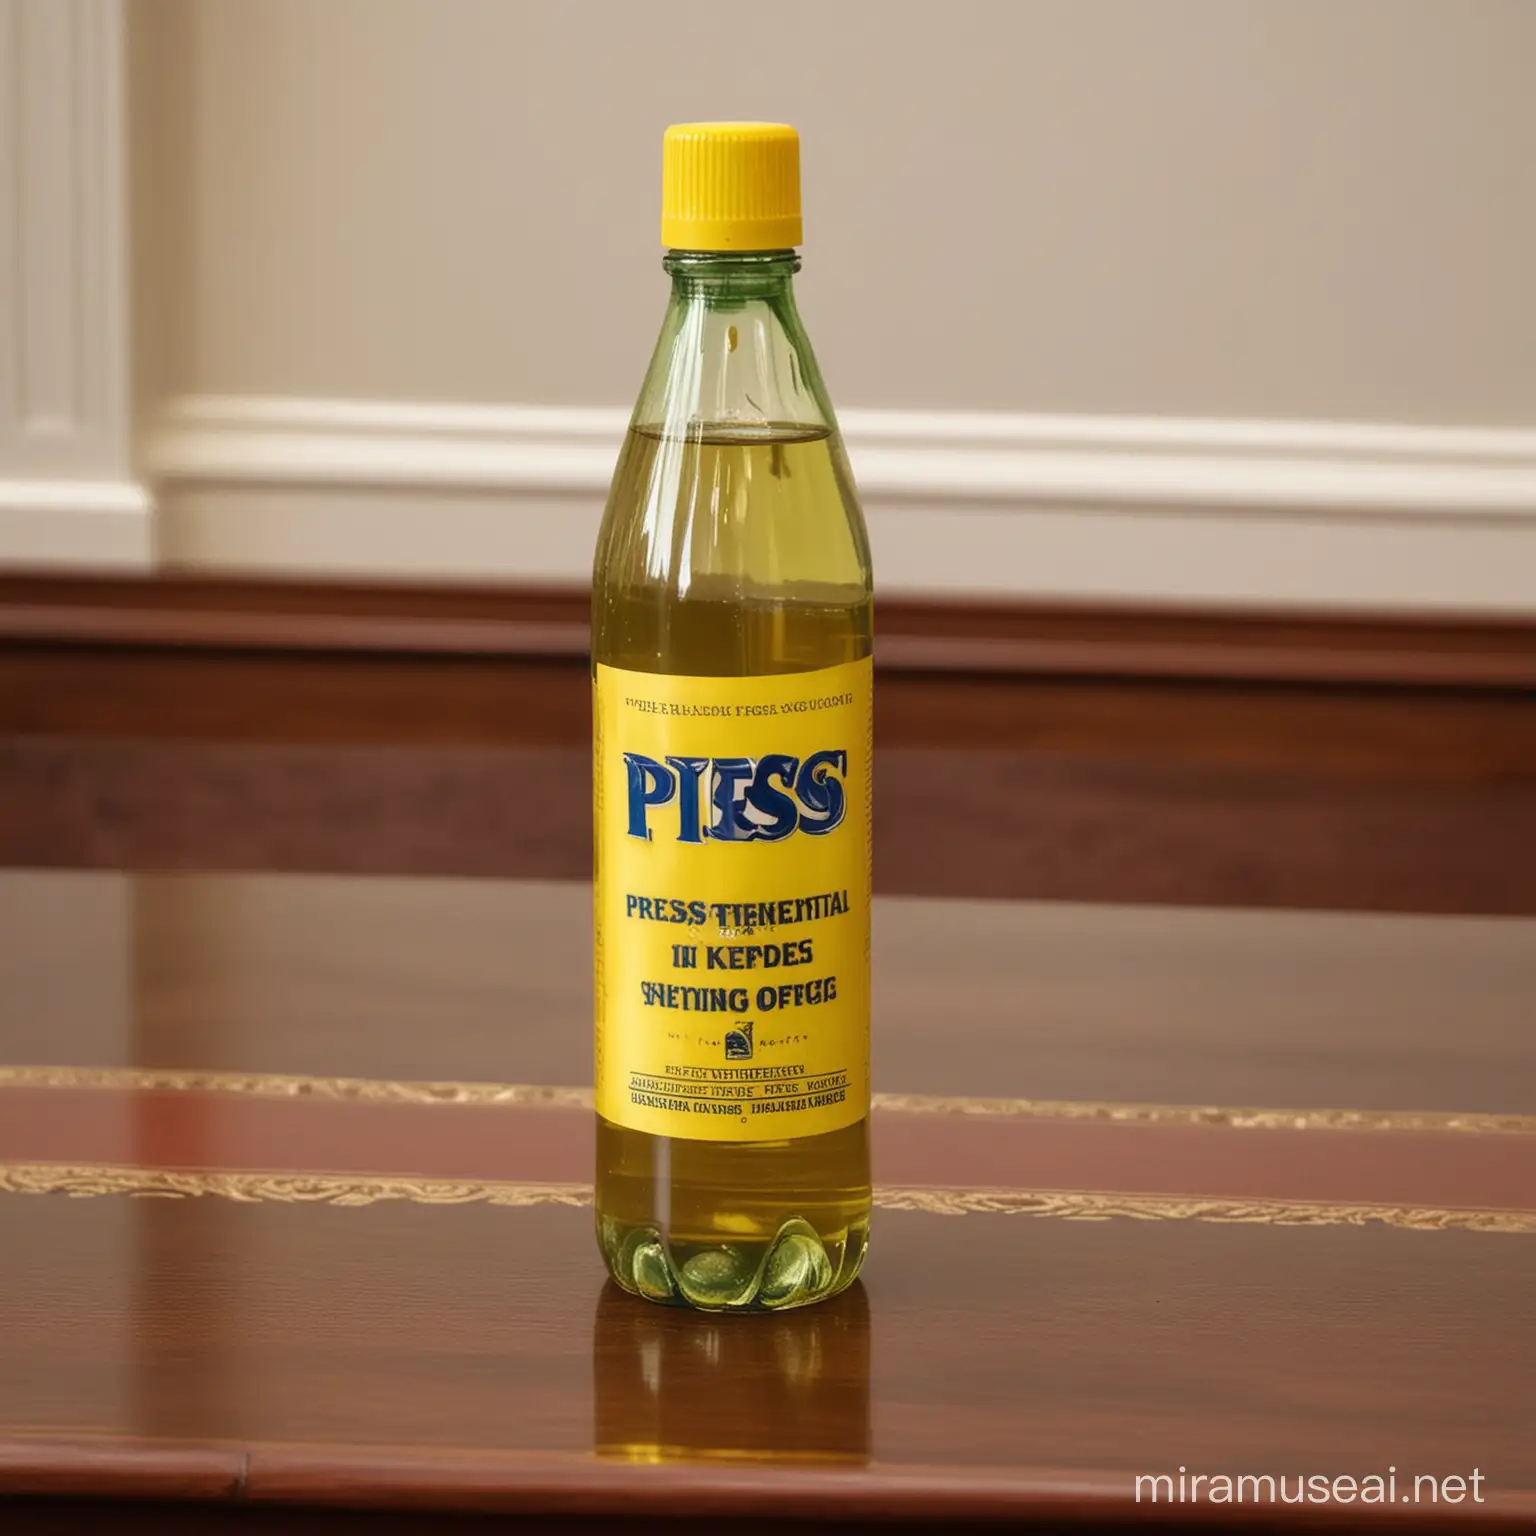 A bottle filled with piss in a presidential office with banner saying piss